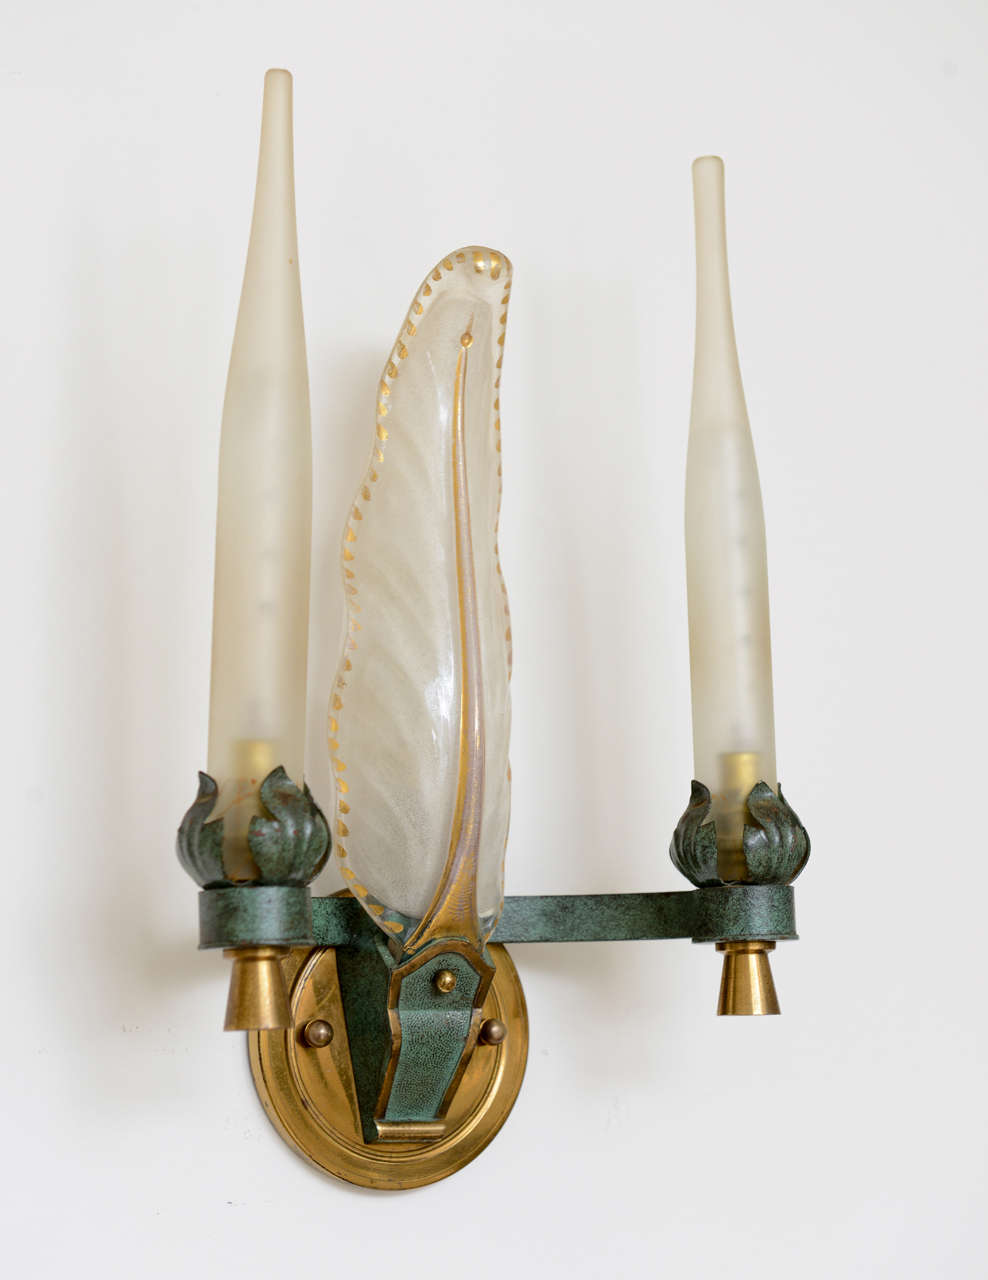 Beautiful pair of wired French wall sconces. Patinated verdigris and brass, handblown frosted glass candles and hand-painted center leaf.

Please feel free to contact us directly for a shipping quote or any additional information by clicking